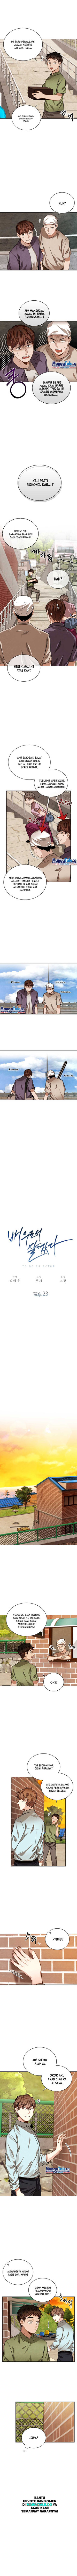 Be the Actor Chapter 23 Bahasa Indonesia